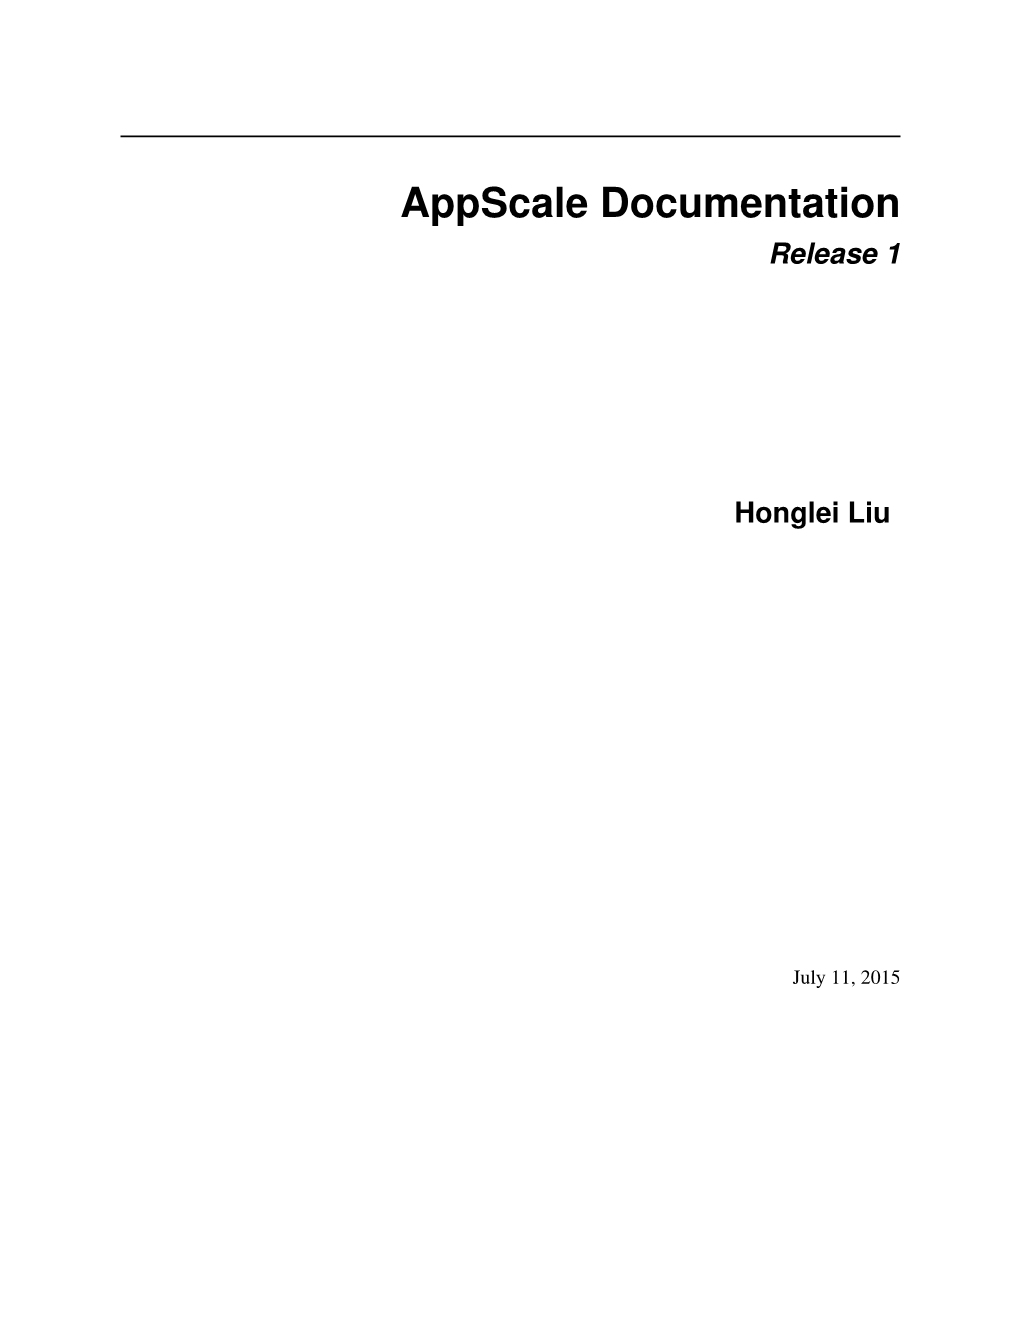 Appscale Documentation Release 1